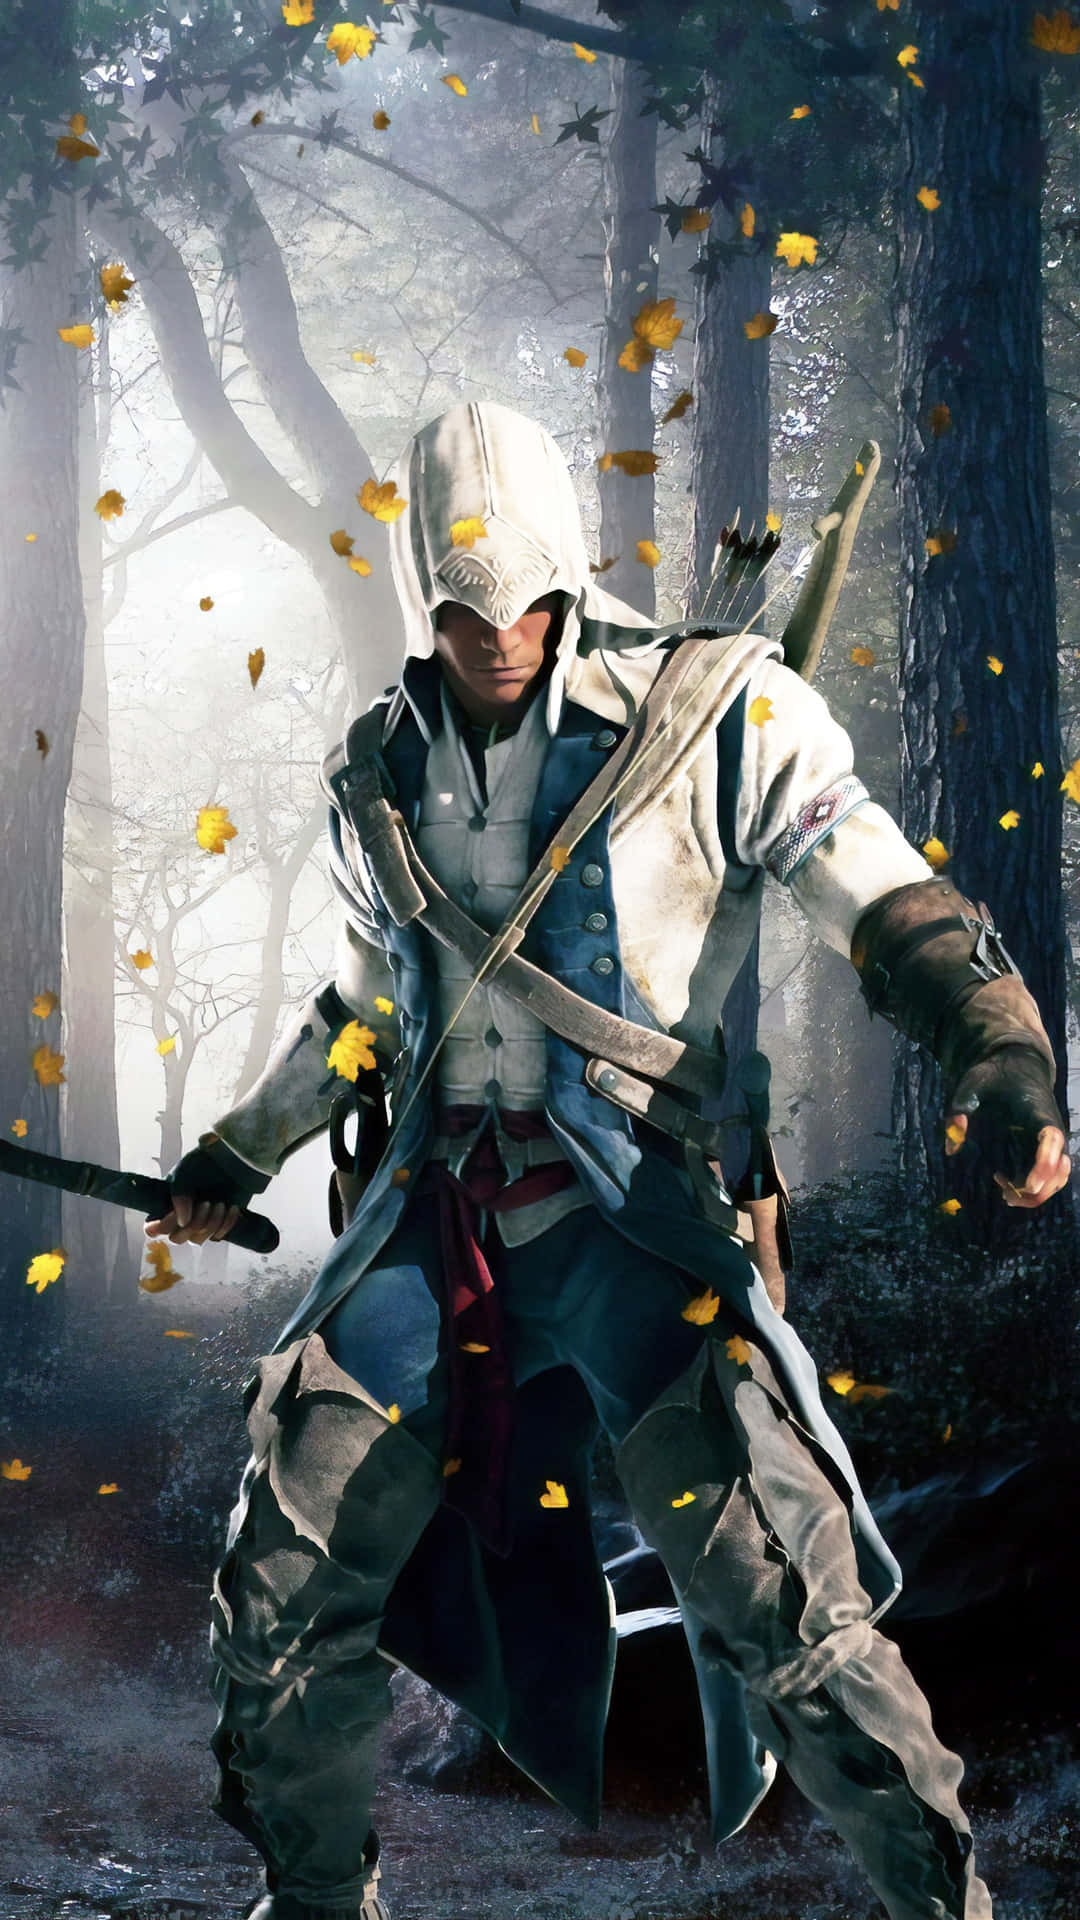 Assassin's Creed Iii - A Man With A Sword In The Woods Wallpaper